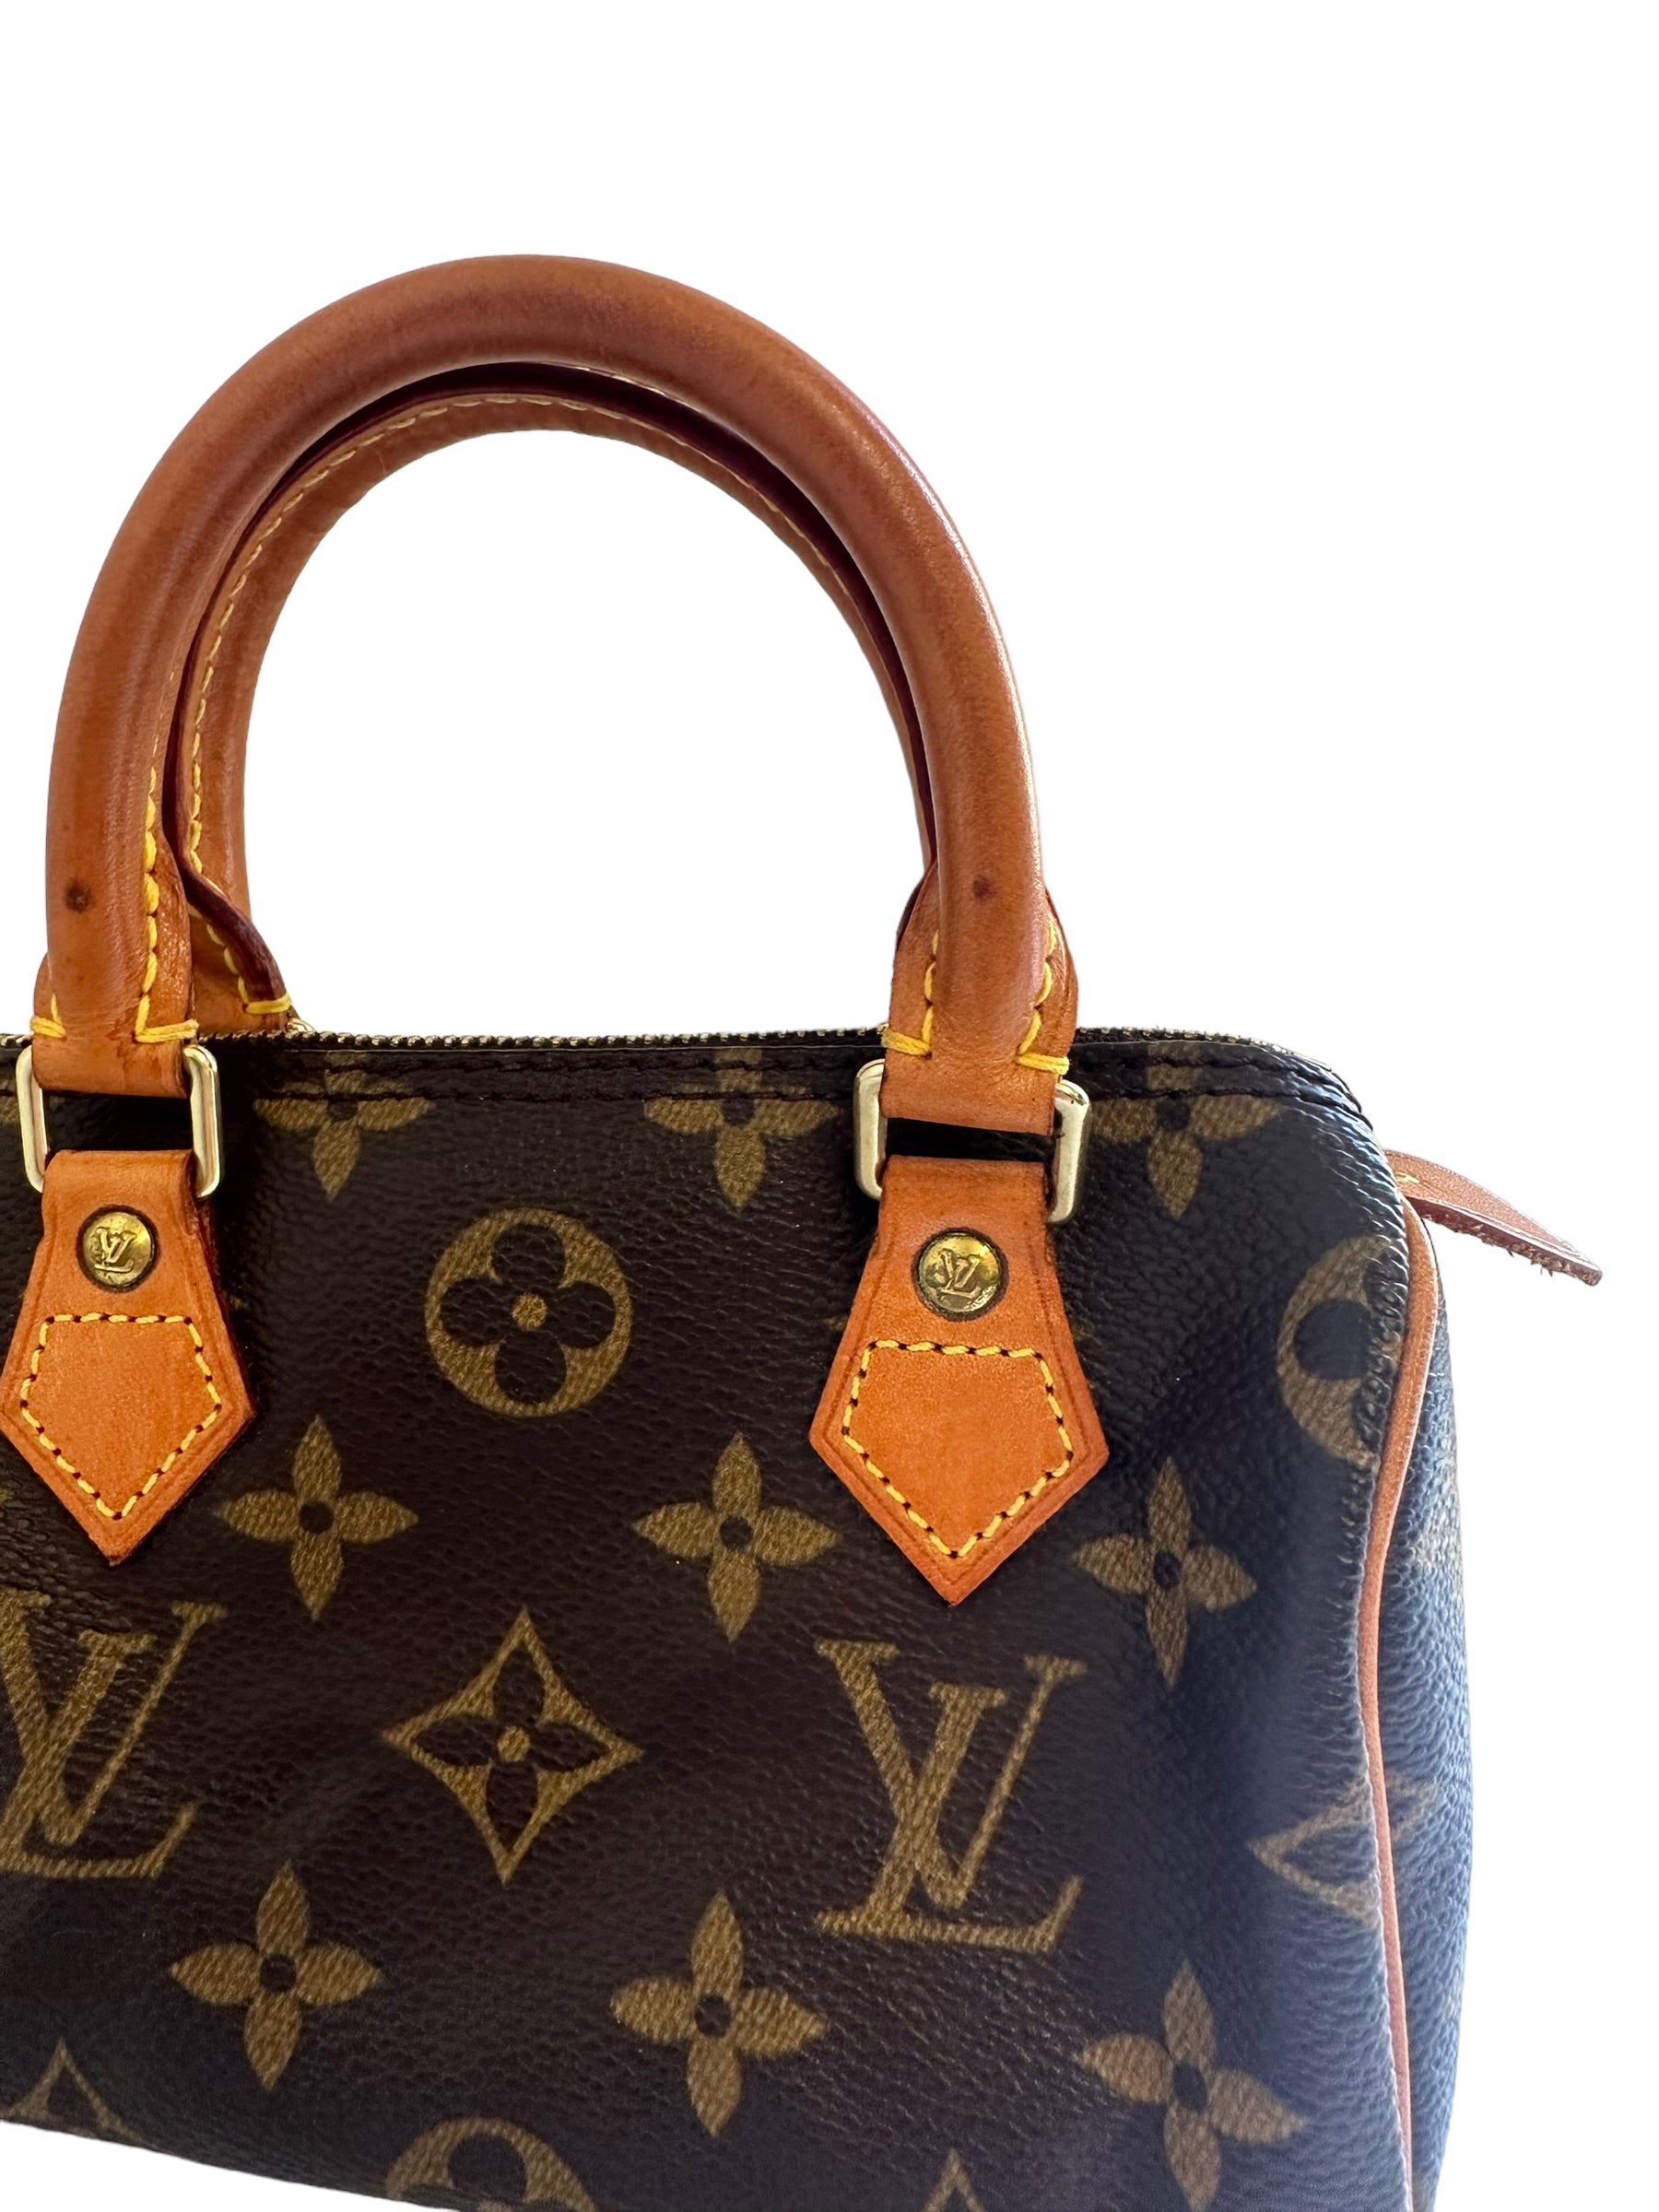 Louis Vuitton Speedy Nano Vintage style With dustbag / new 96% Hiếm lắm .  Only 1x ạ [ SOLD ]